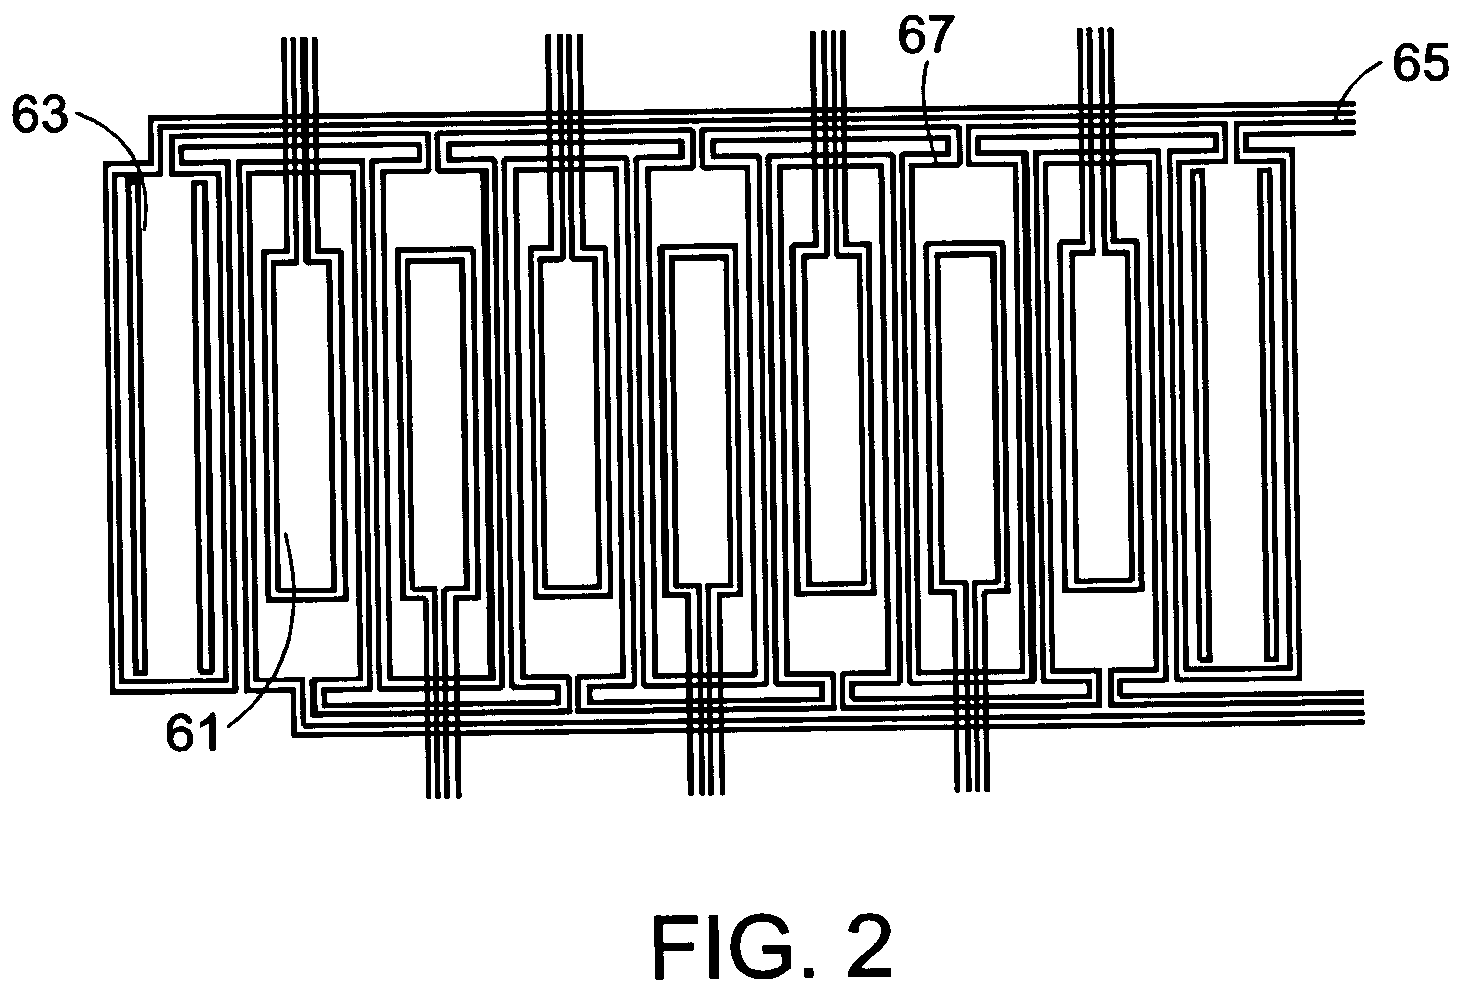 Fabrication of samples having predetermined material conditions